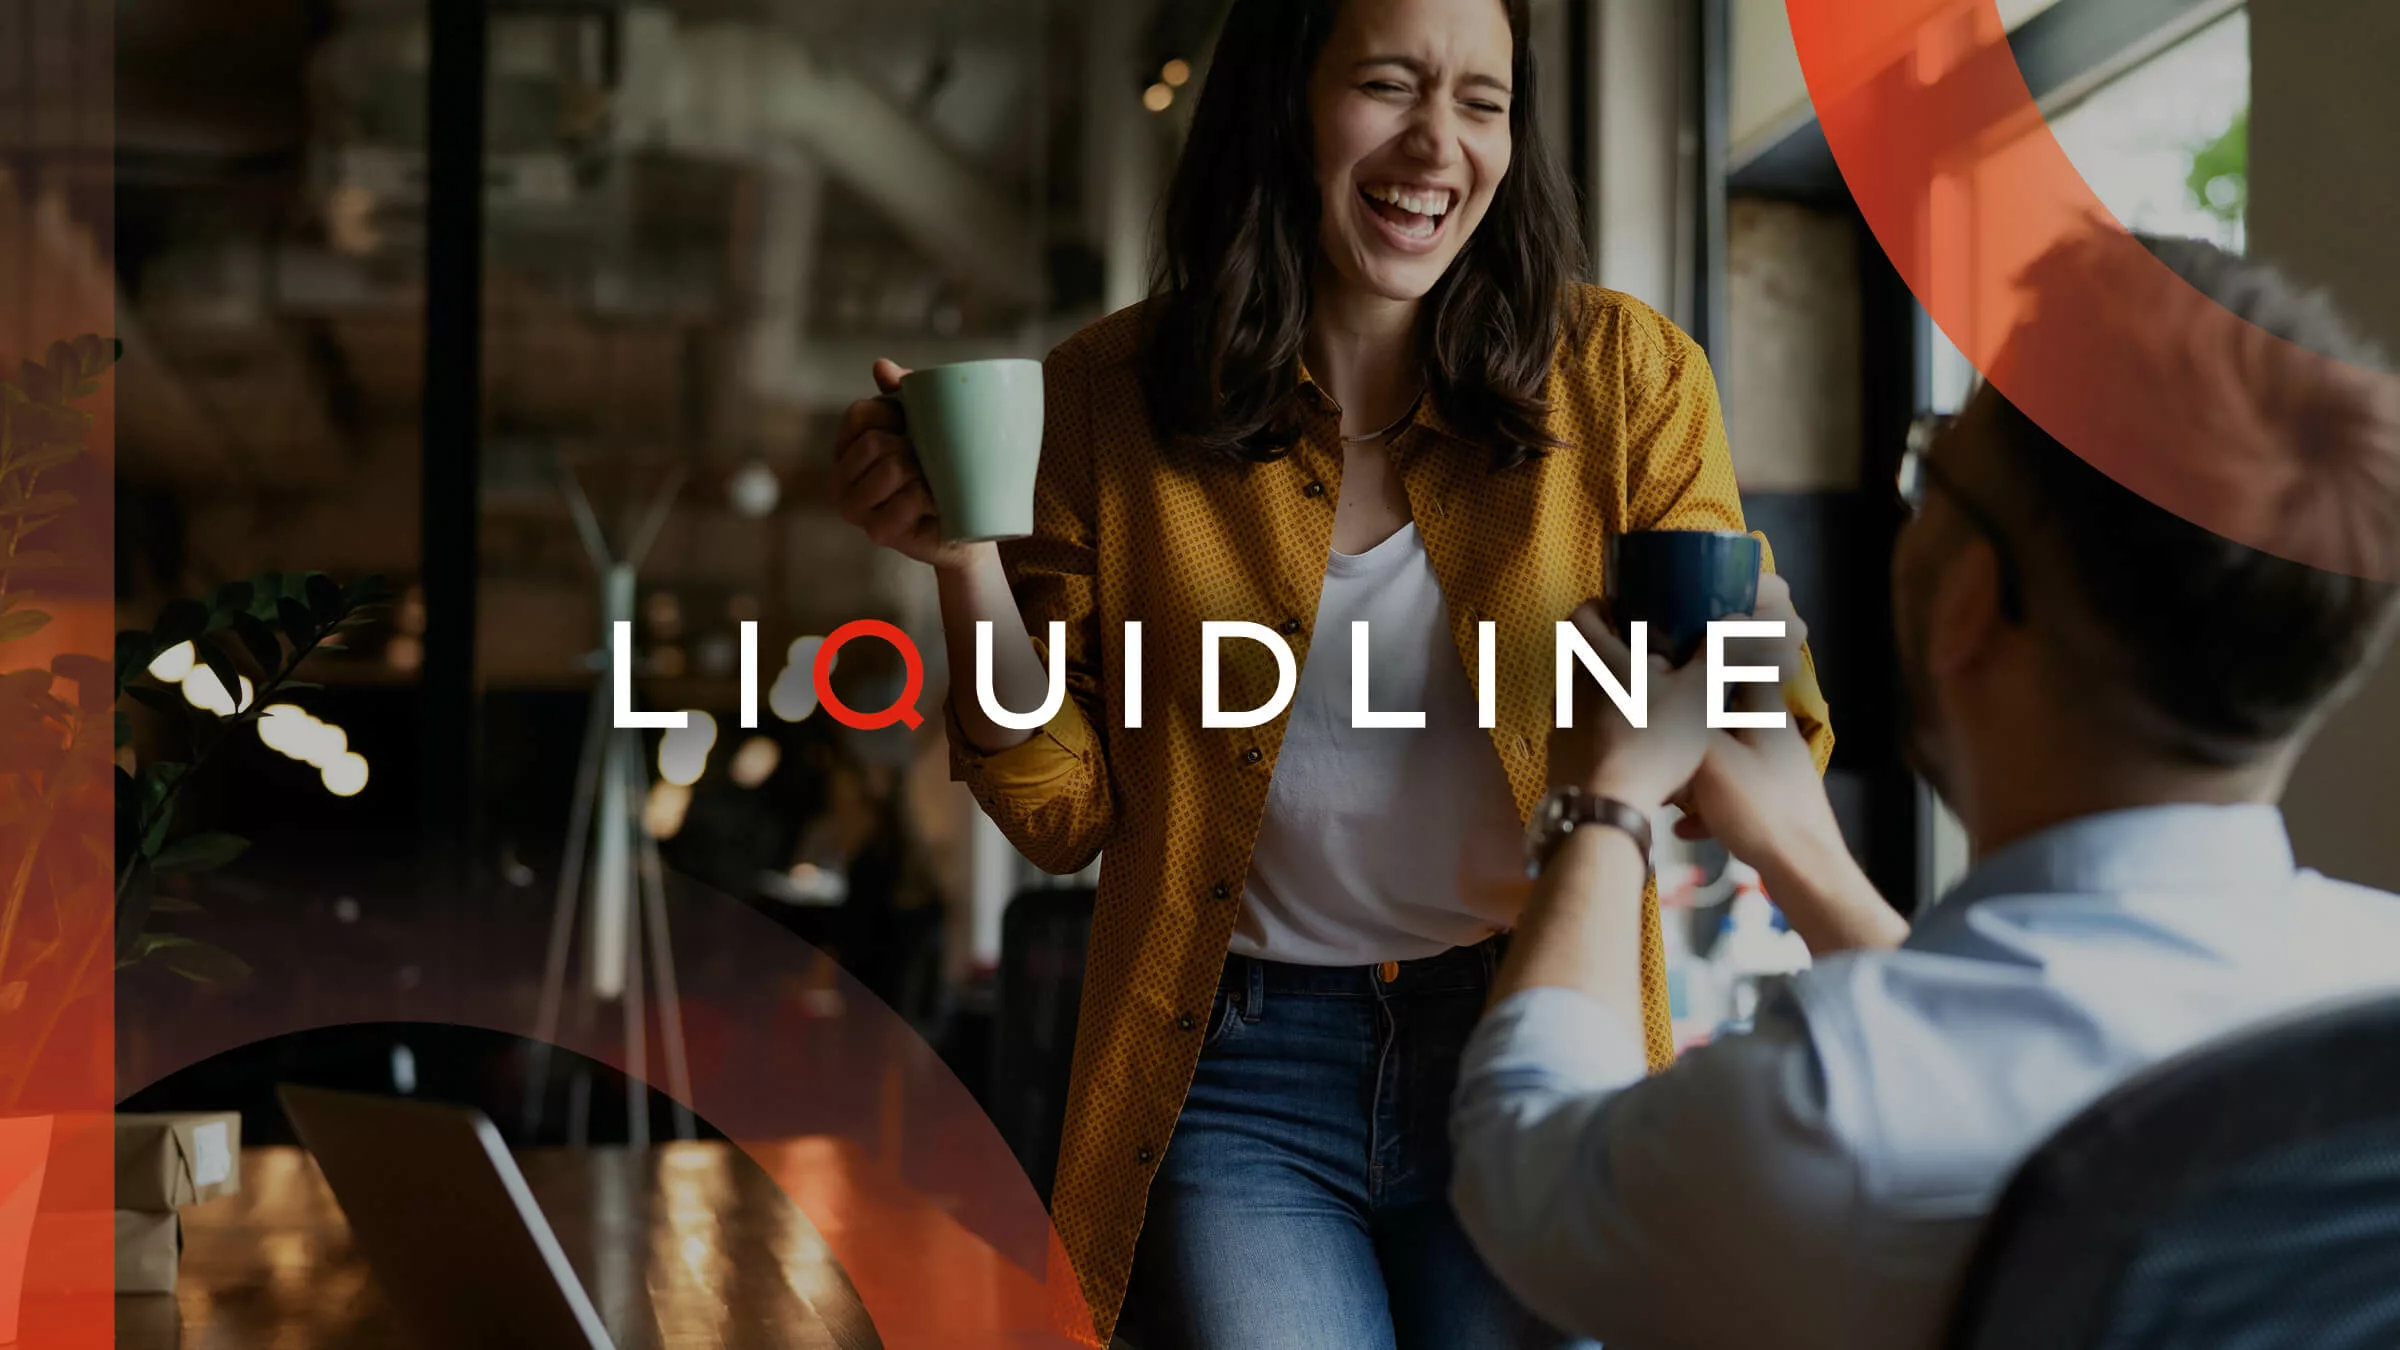 Header image showing a woman laughing in the background with the Liquidline logo over the top